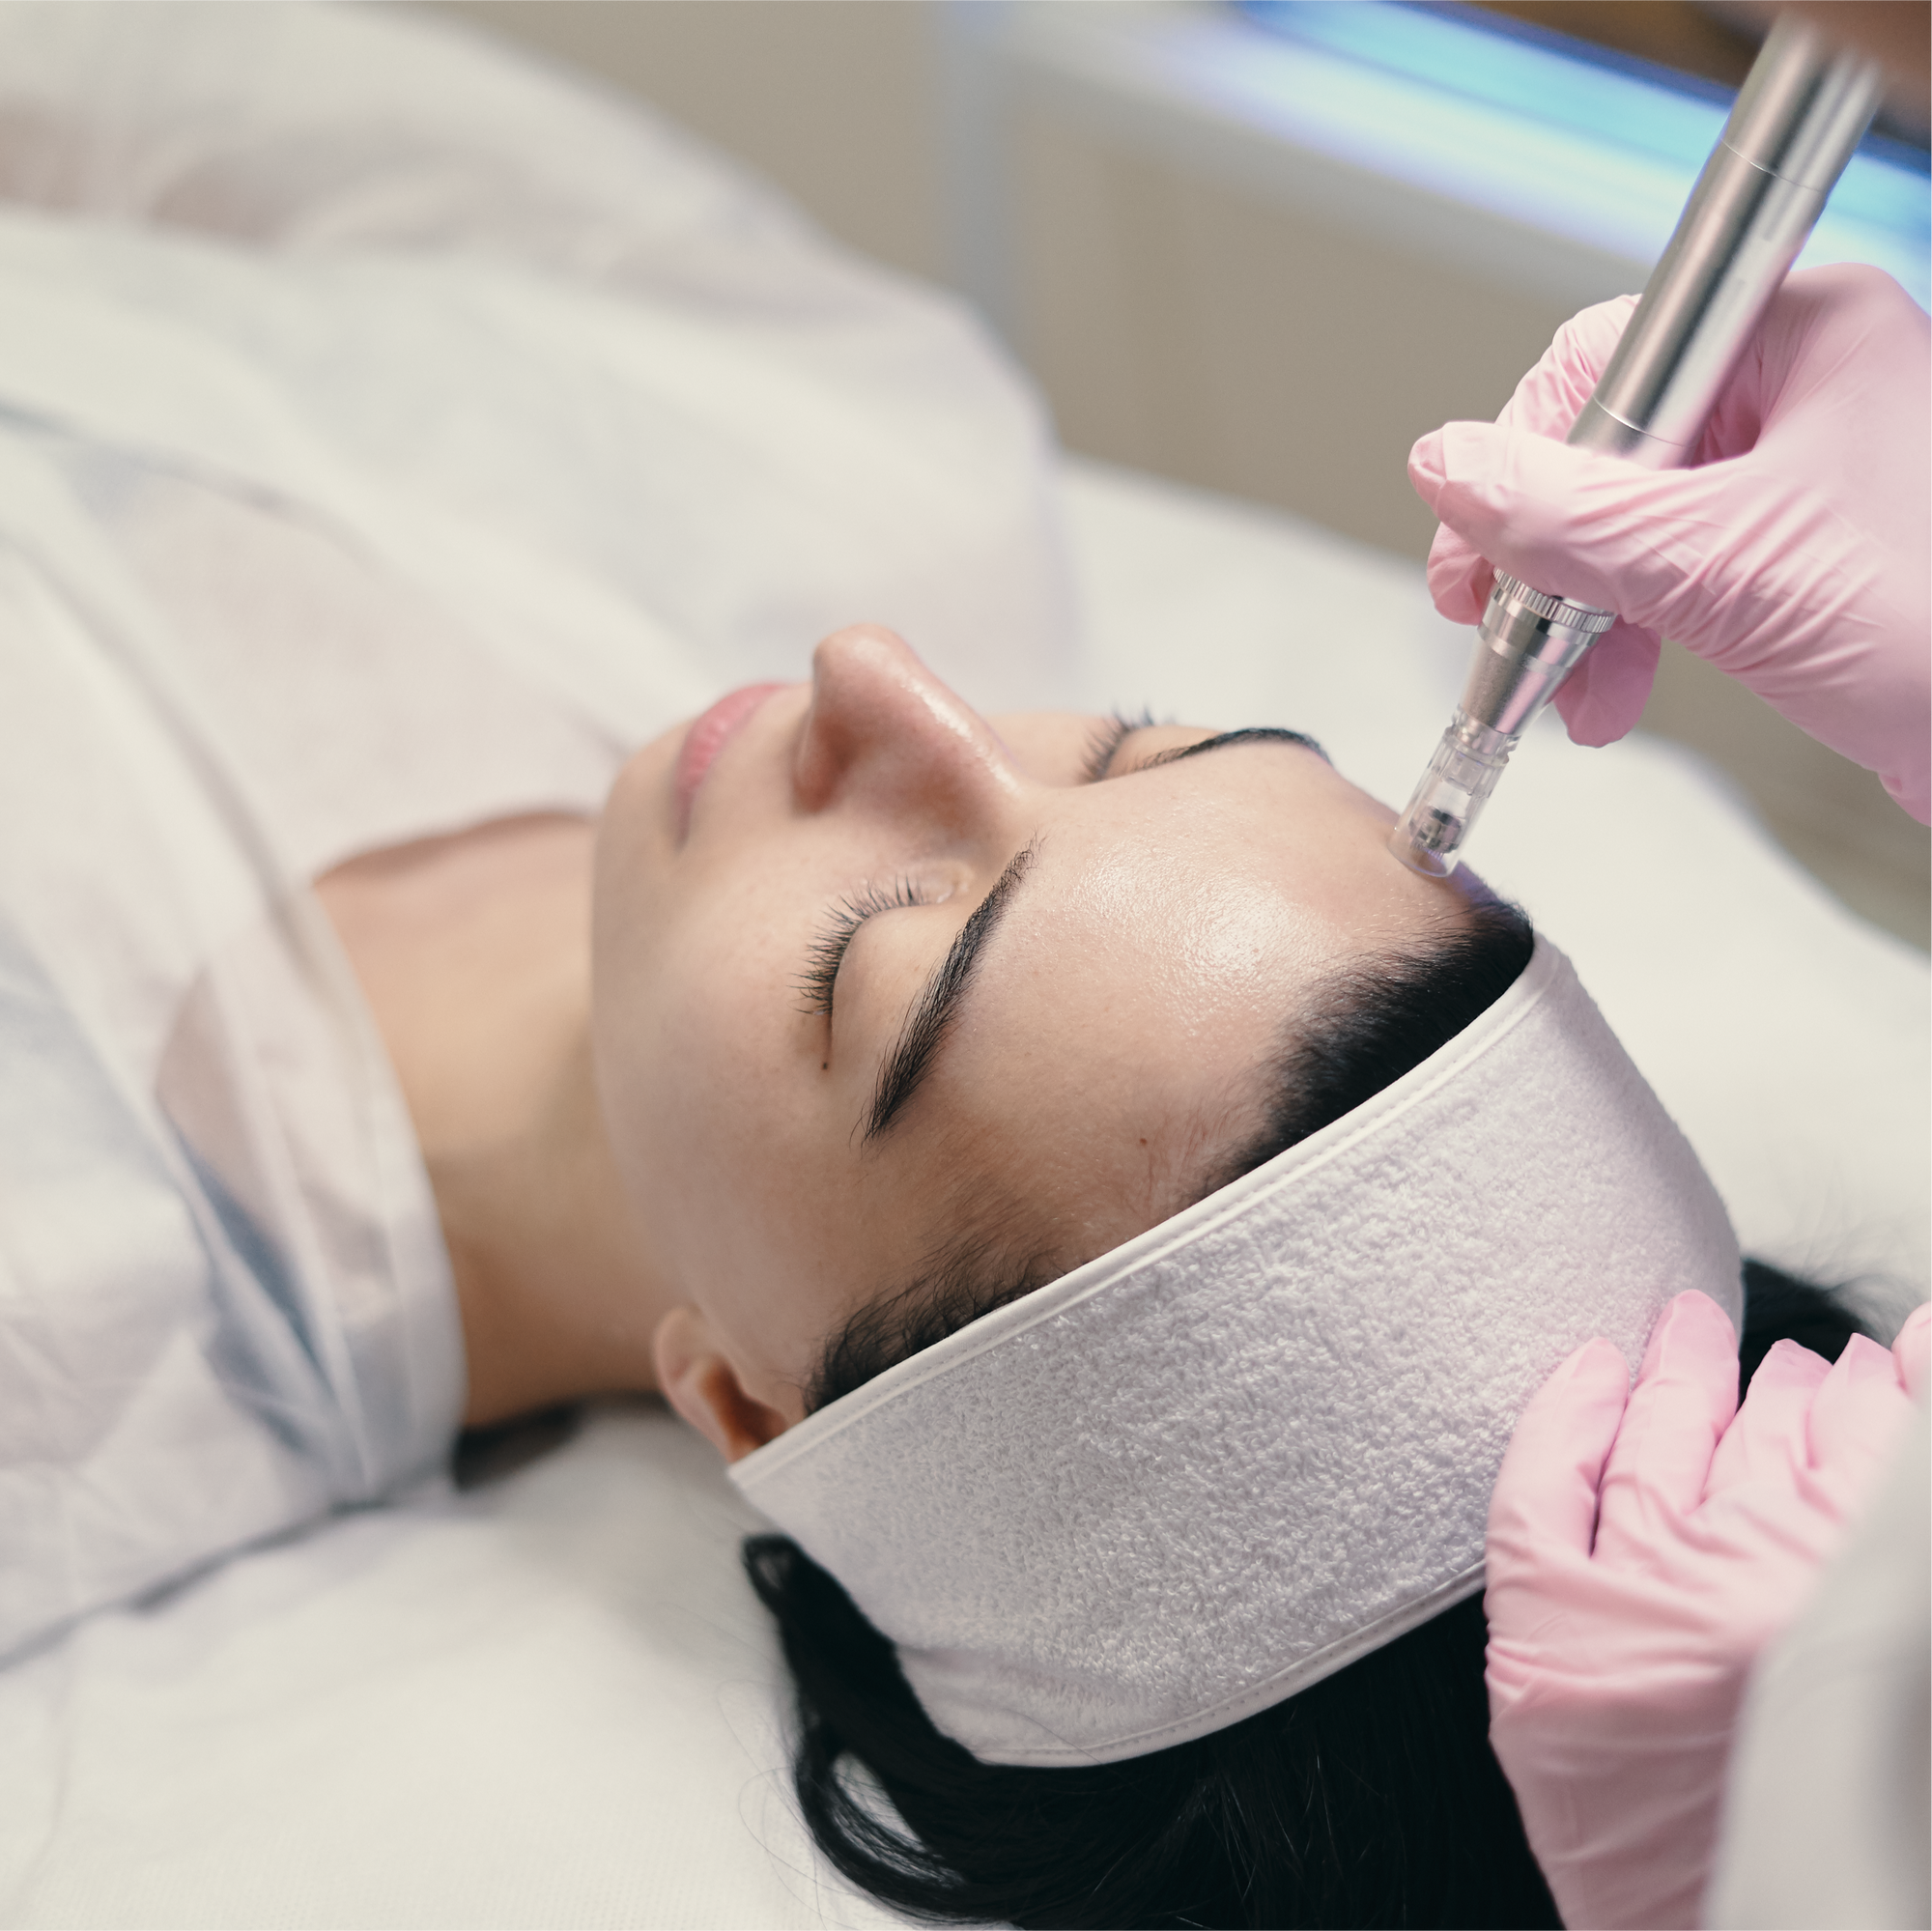 WHAT IS MICRO-NEEDLING?